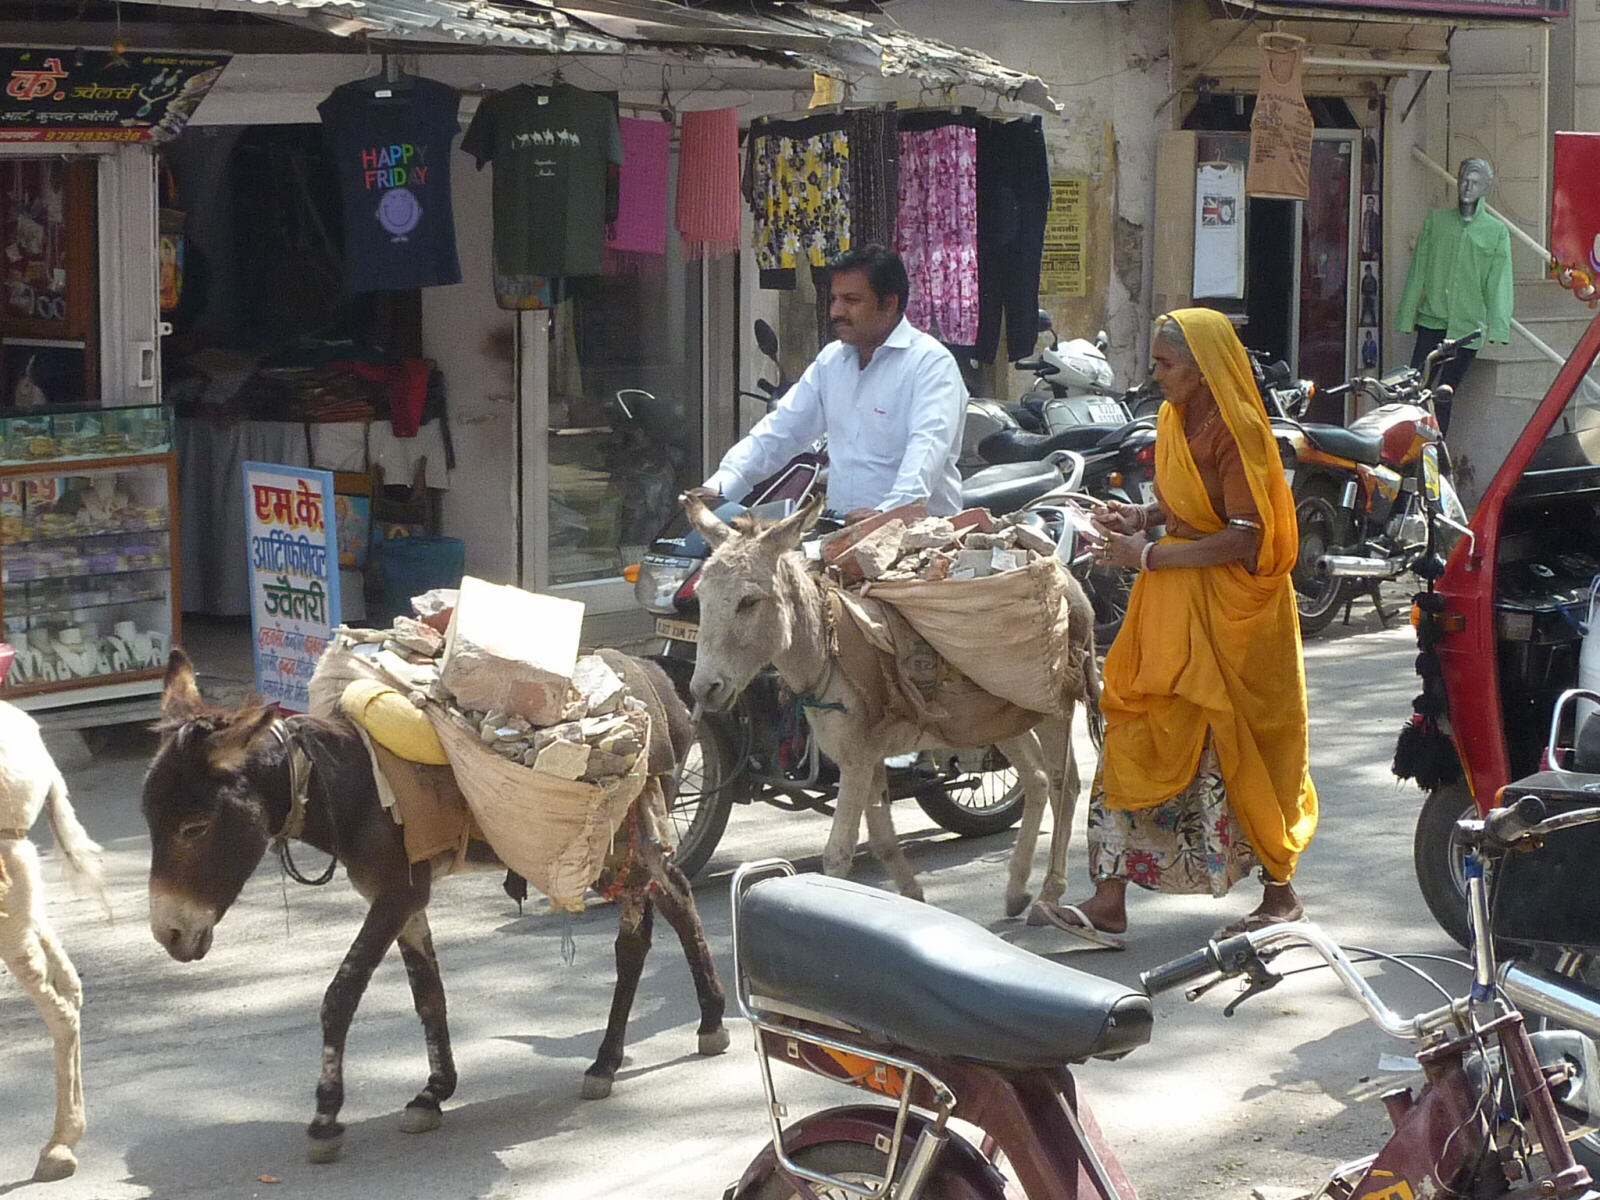 A donkey train carrying rubble through the streets of Udaipur, Rajasthan